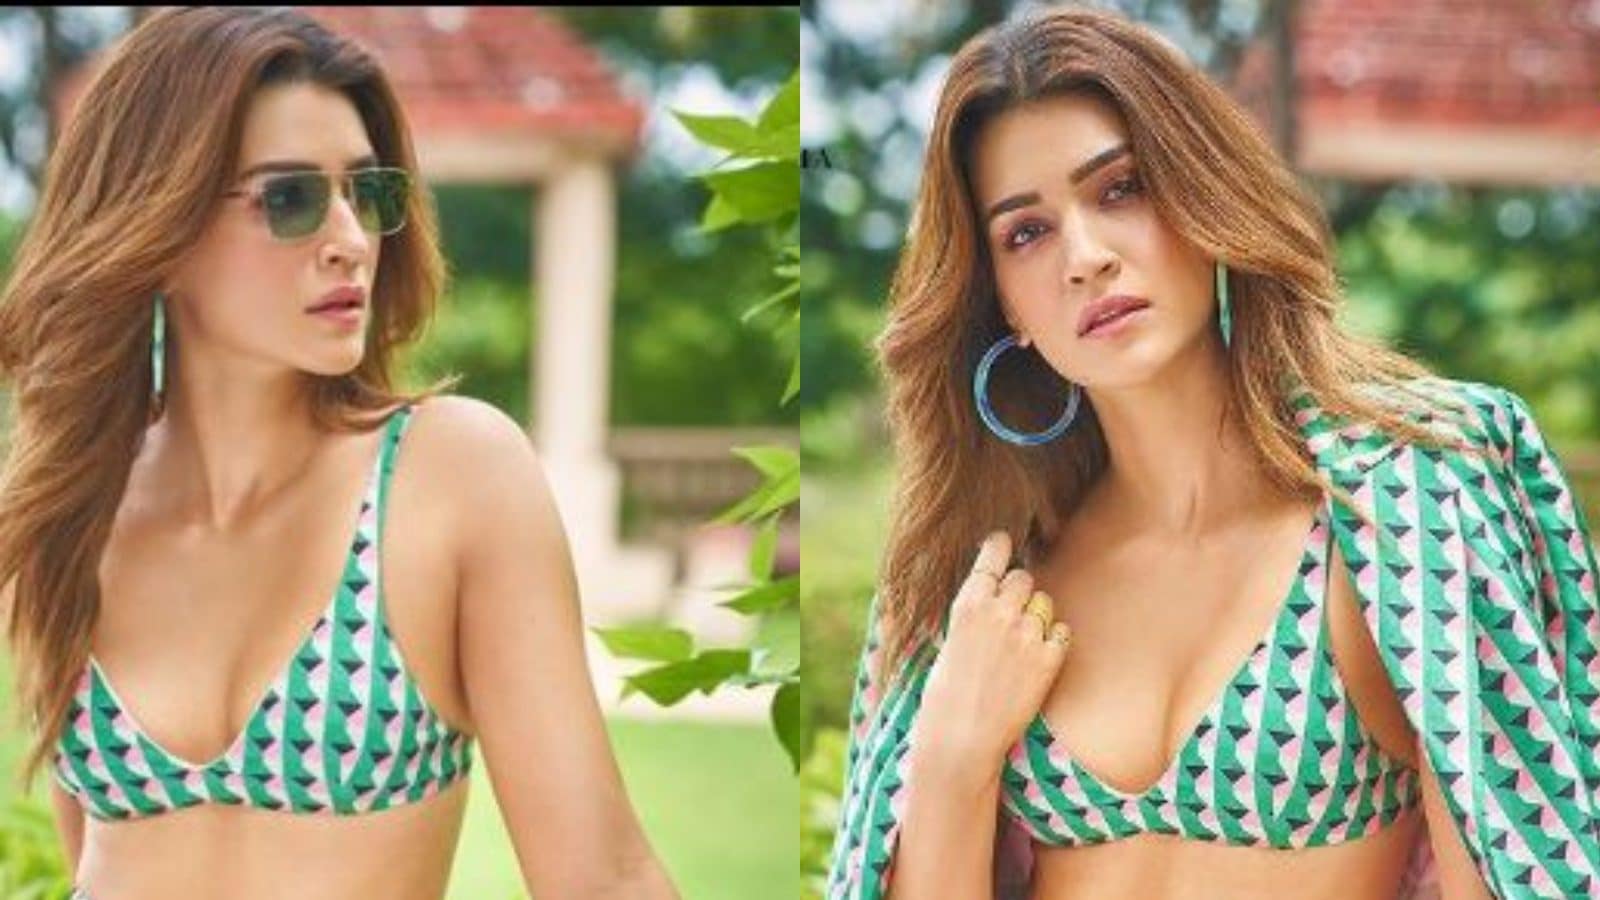 Xxx Boliwood Kirti Ki Sexy Hd - Kriti Sanon Looks Sensuous In Green Bralette as She Poses for Magazine  Cover, See Pictures - News18